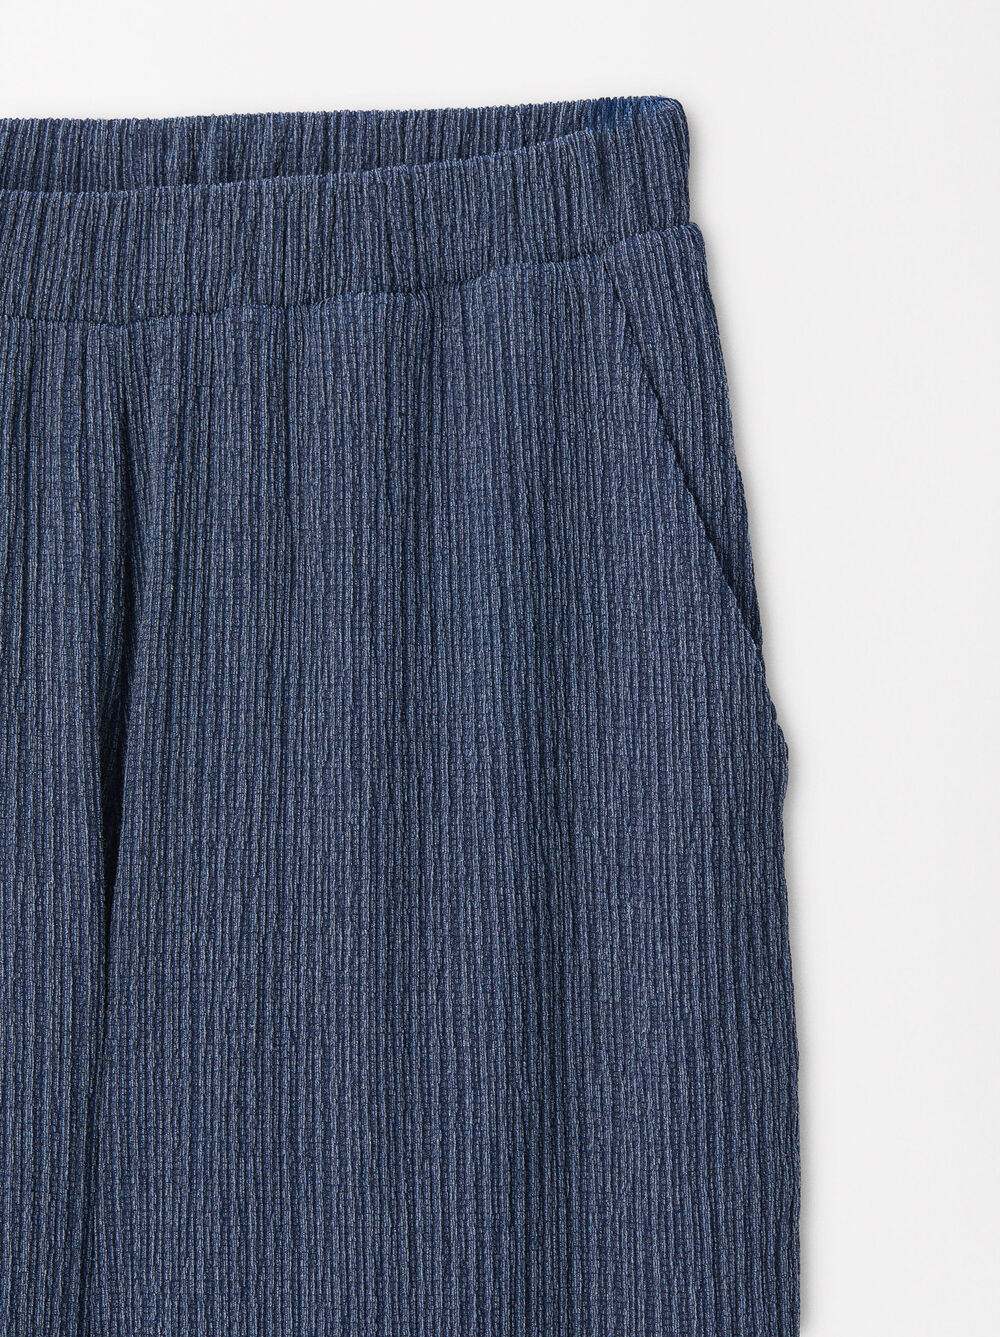 Textured Pants With Elastic Waistband image number 6.0